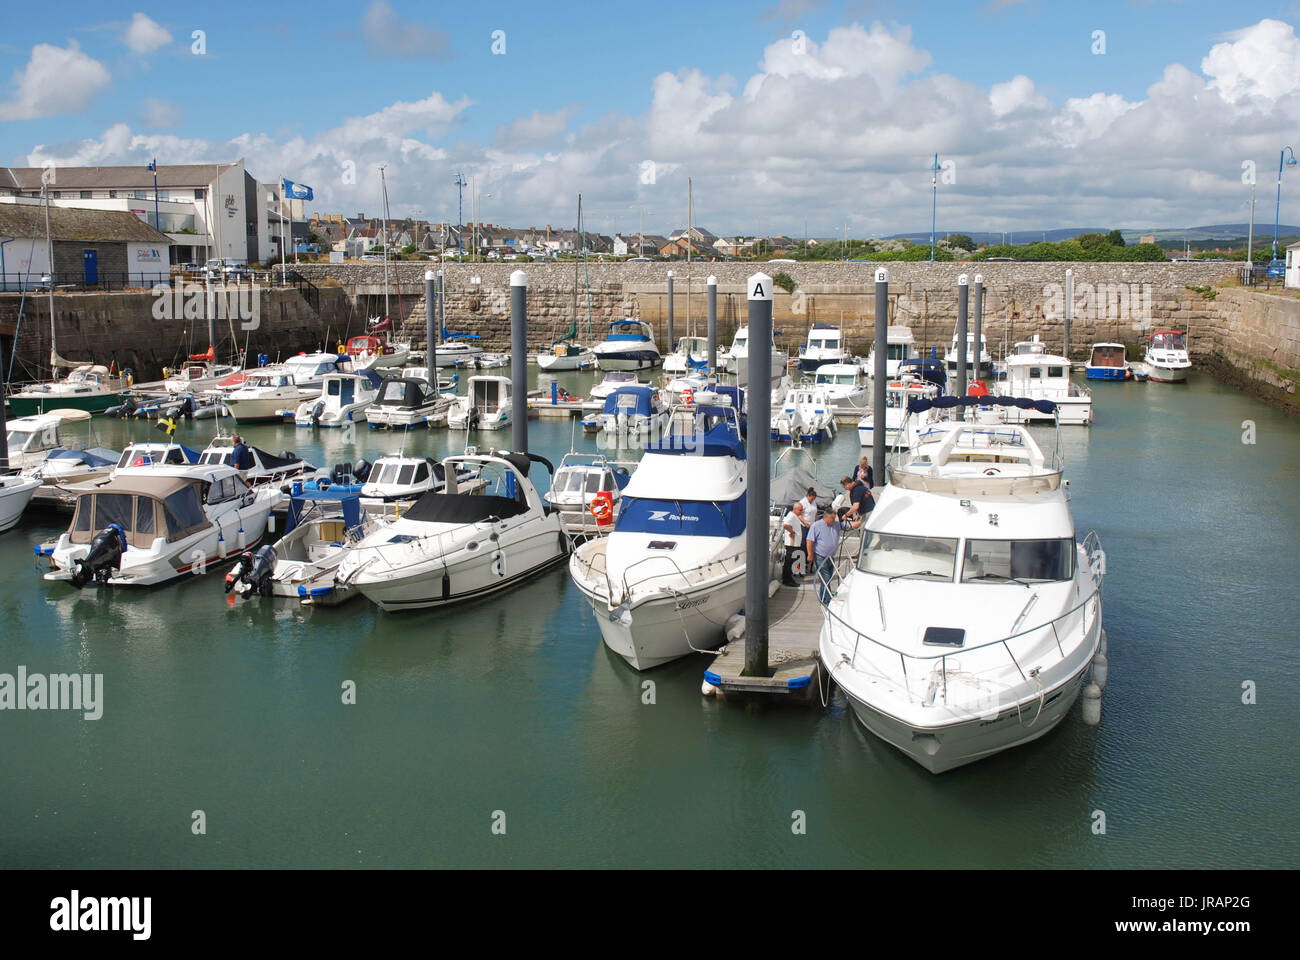 Porthcawl, Wales: Yachts and boats float in the town's harbour on a bright summer day. Stock Photo